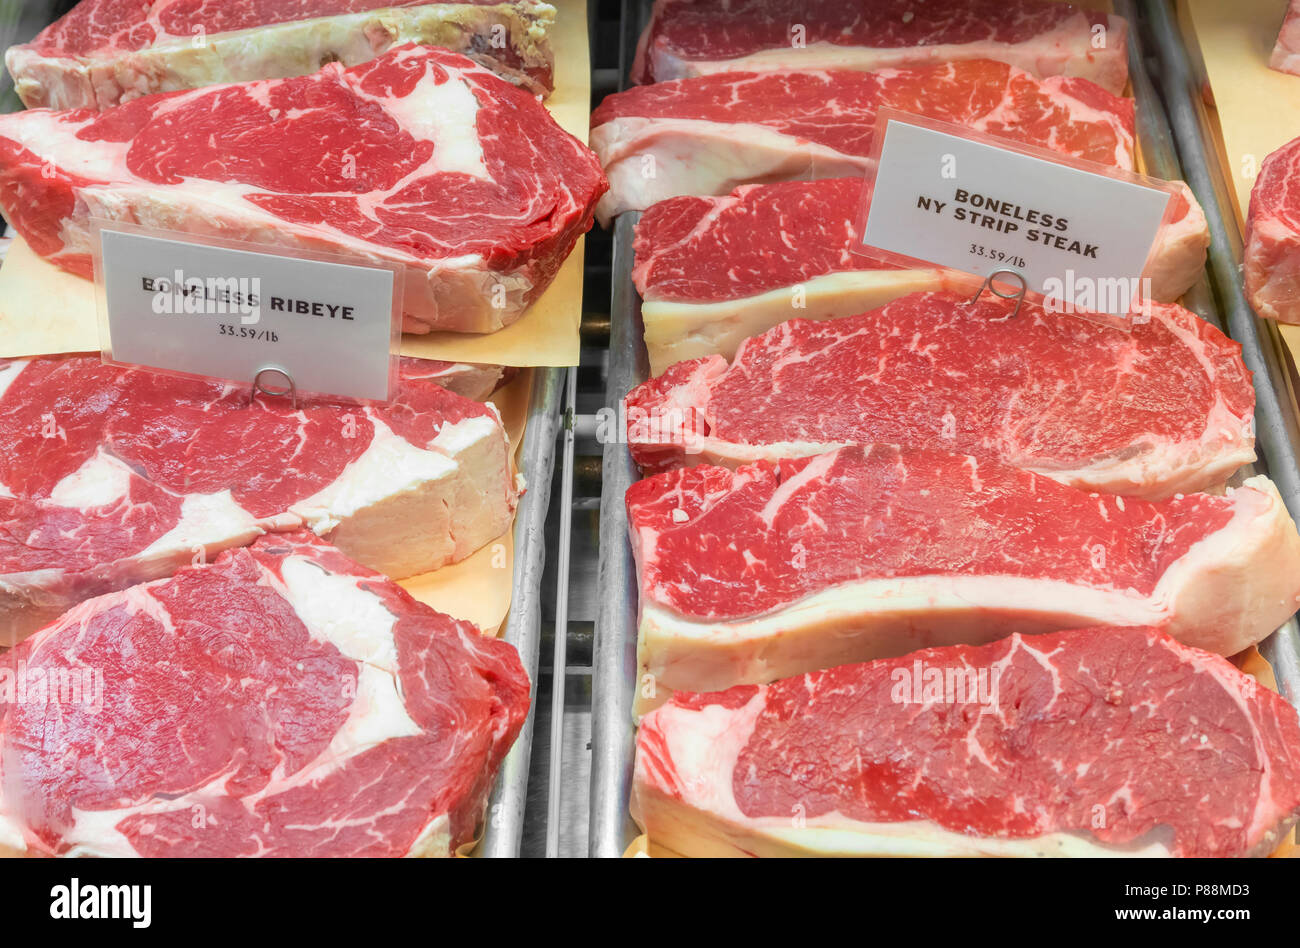 Beef steak for sale in a store Stock Photo